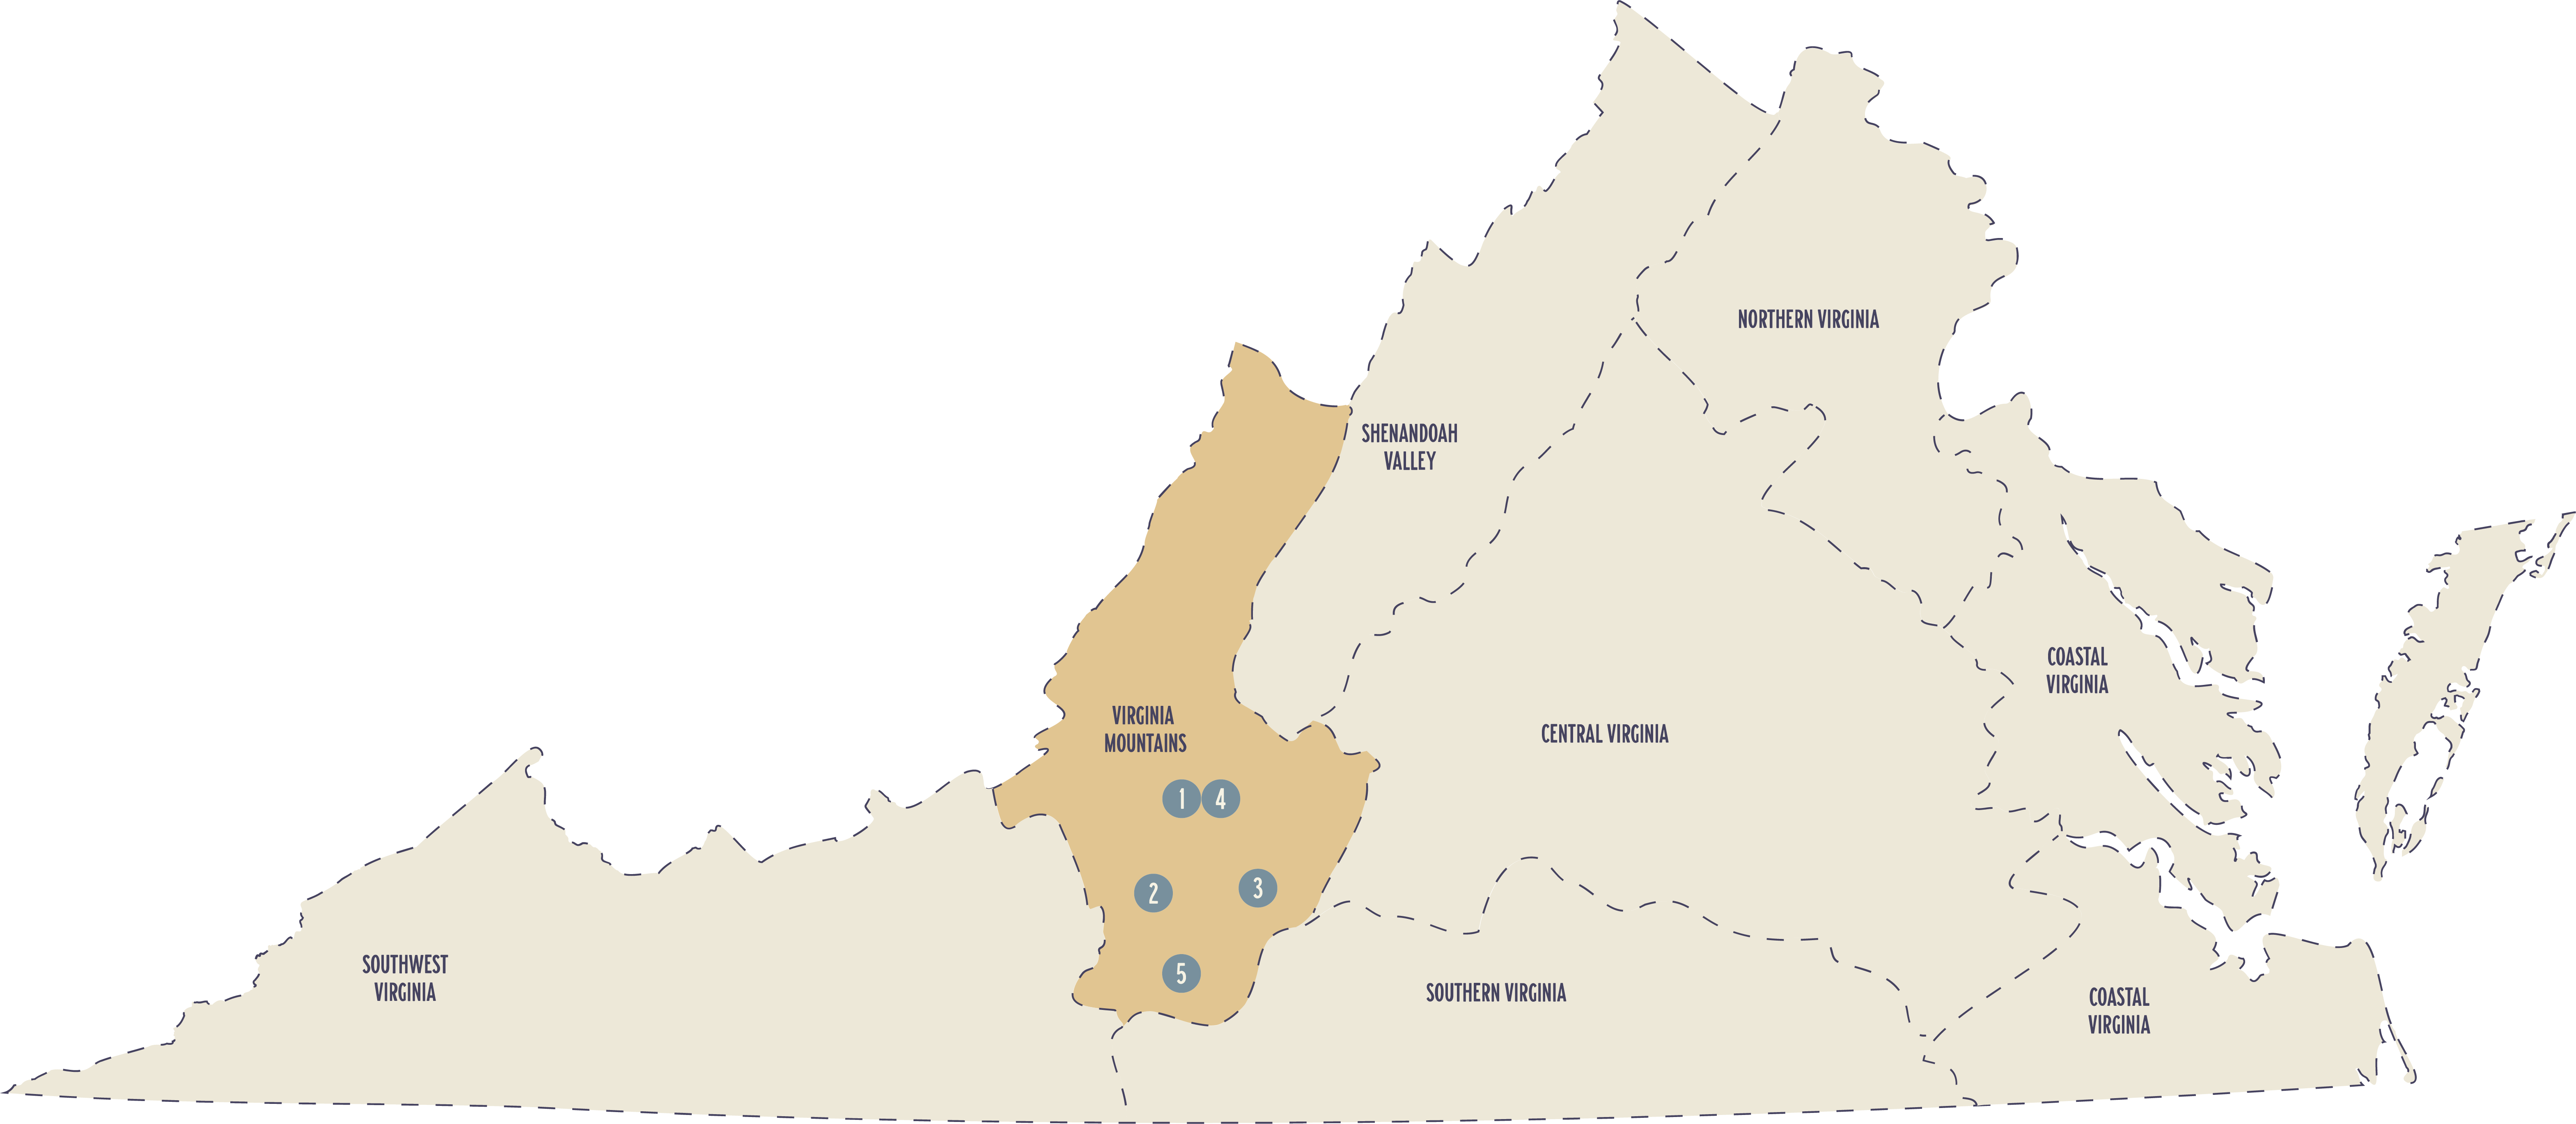 Va Mountains – Virginia distilleries map – OUT OF DATE copy 3